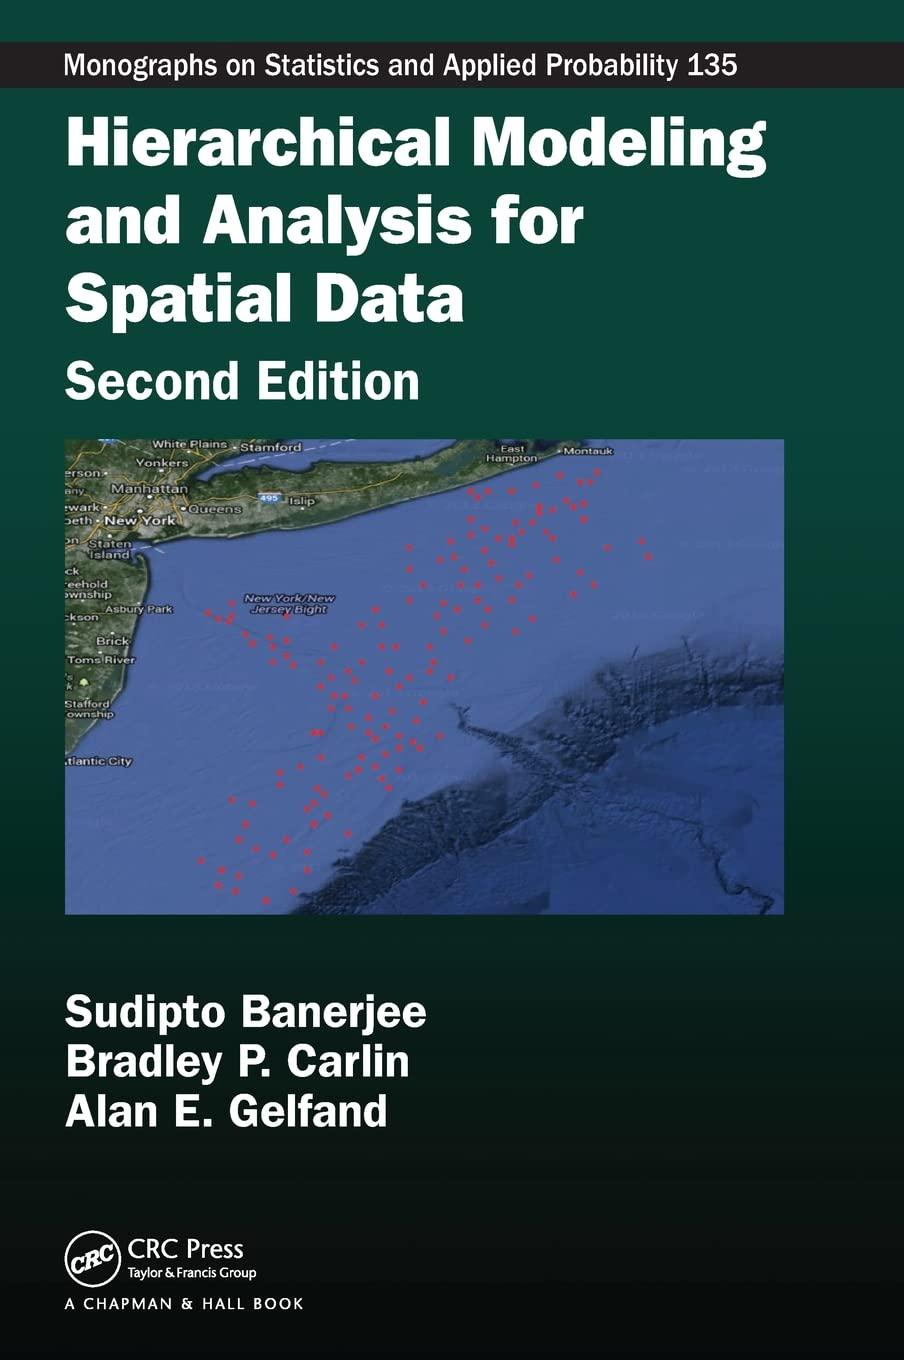 hierarchical modeling and analysis for spatial data 2nd edition sudipto banerjee, bradley p. carlin, alan e.